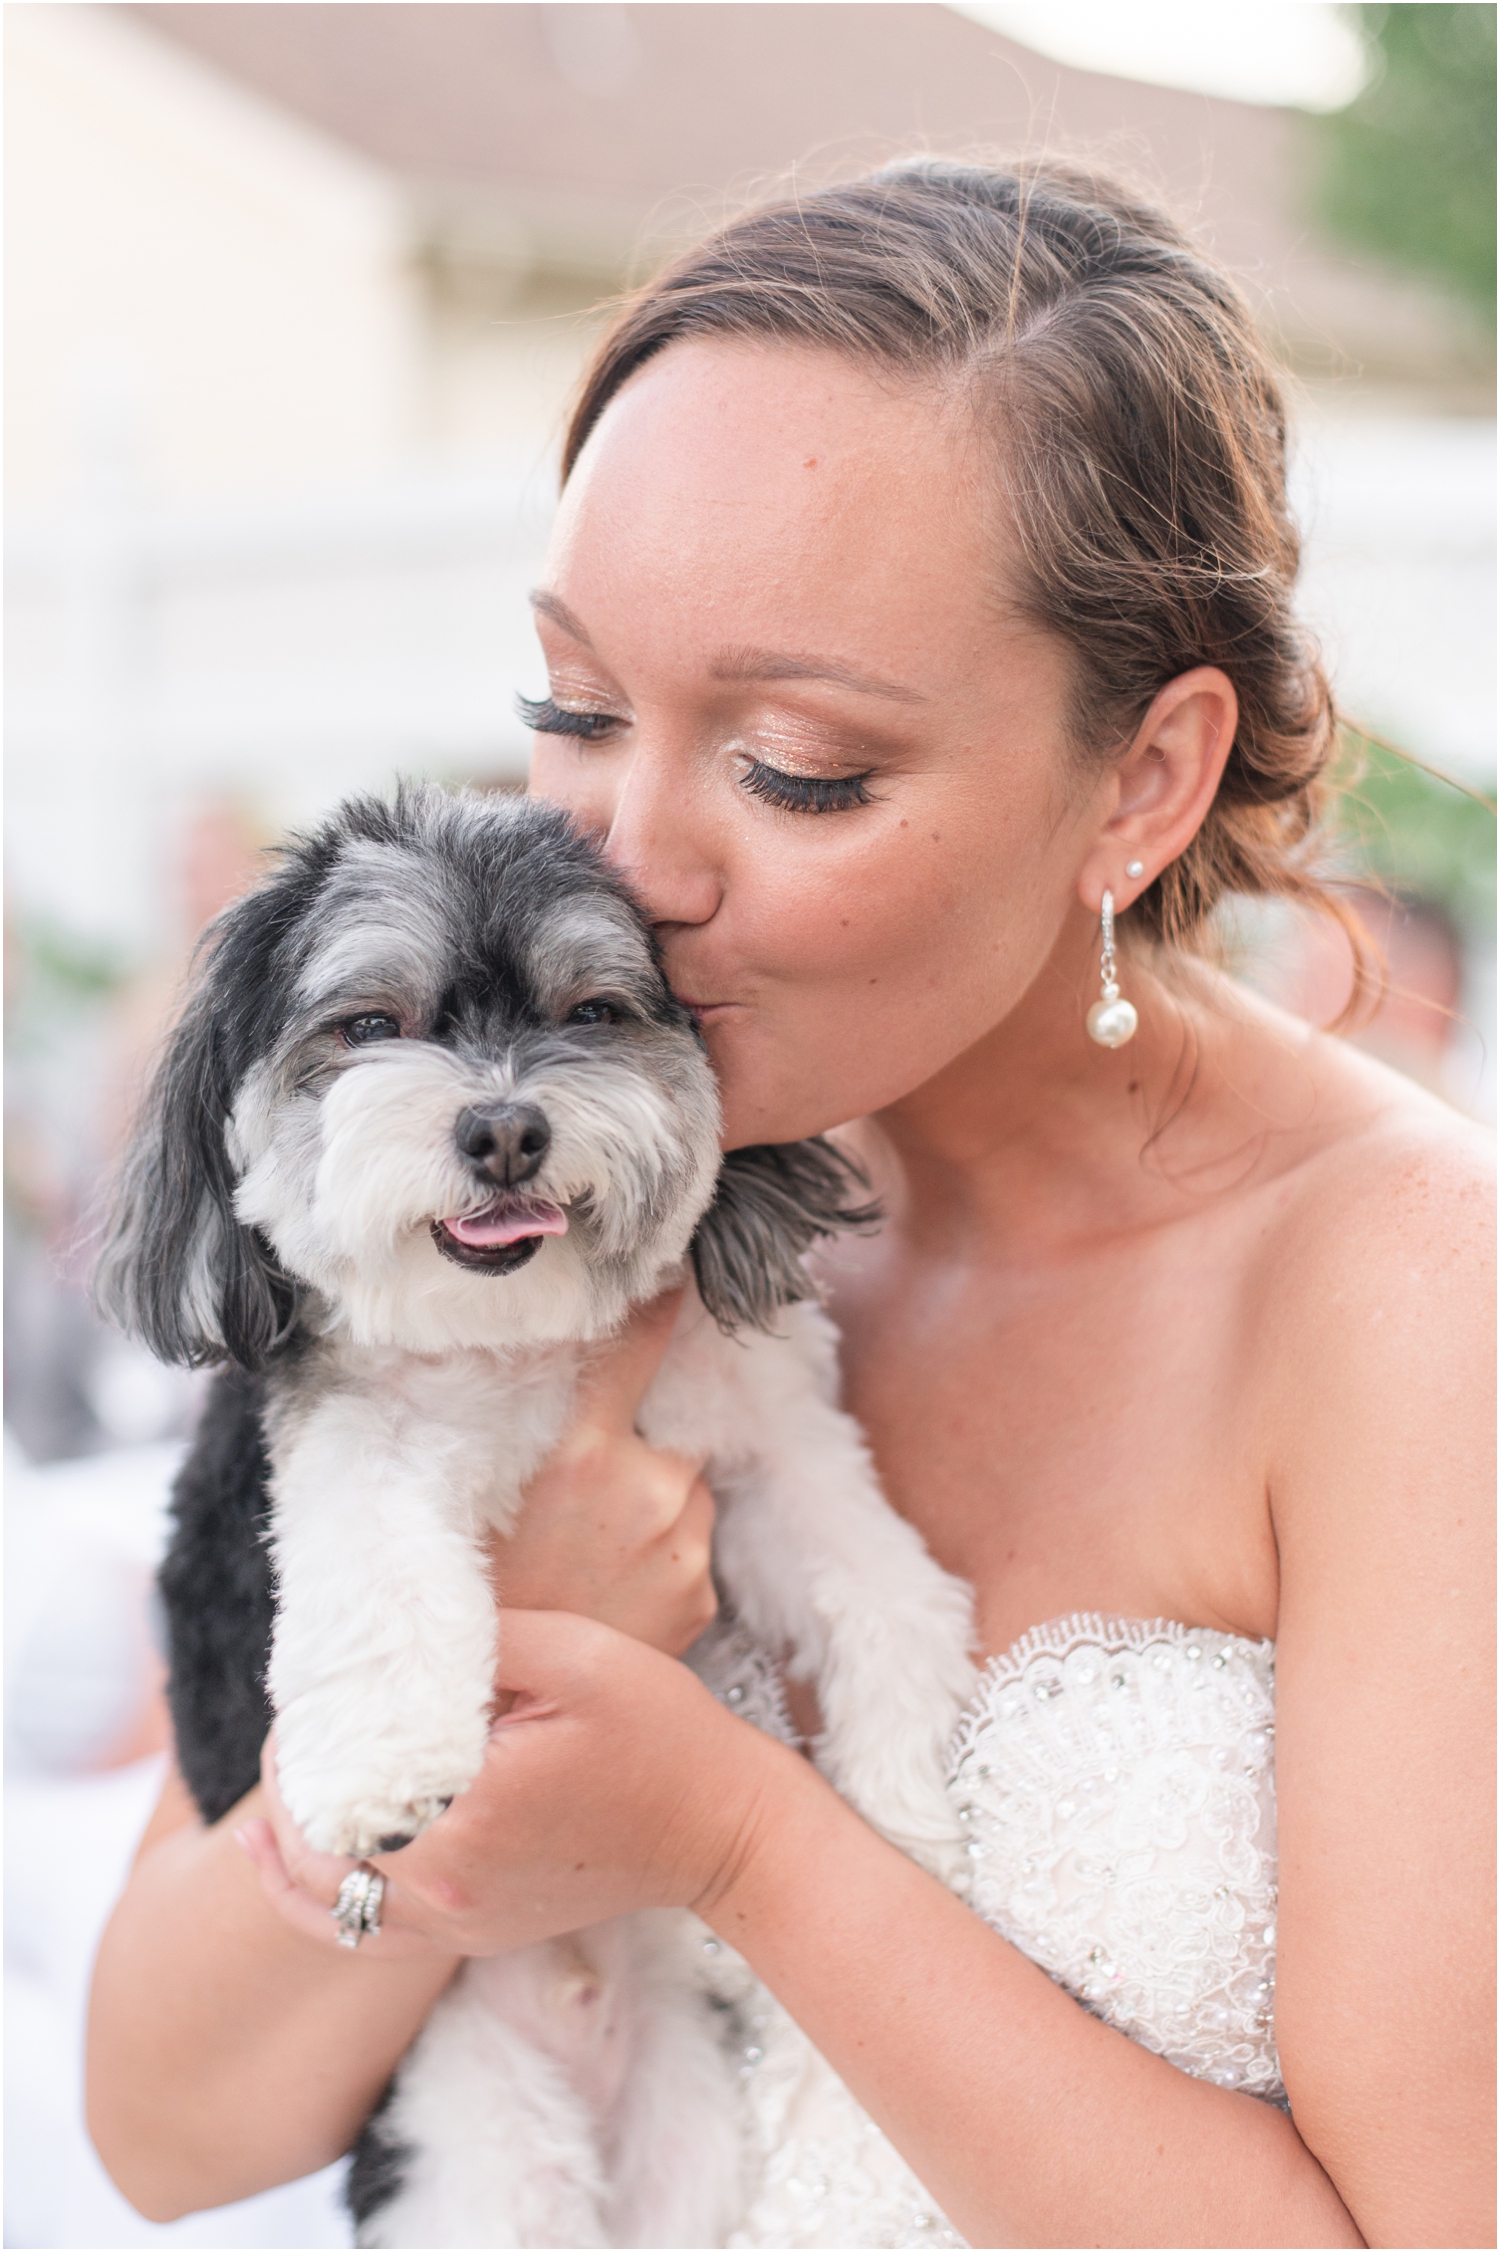 Bride and Dog Portraits Outdoor Backyard Wedding Reception Blush Wedding Gown Wedding Photography Grey and Coral Pink Wedding Intimate Flower Garden Indiana Wedding Photographer Rose Courts Photography